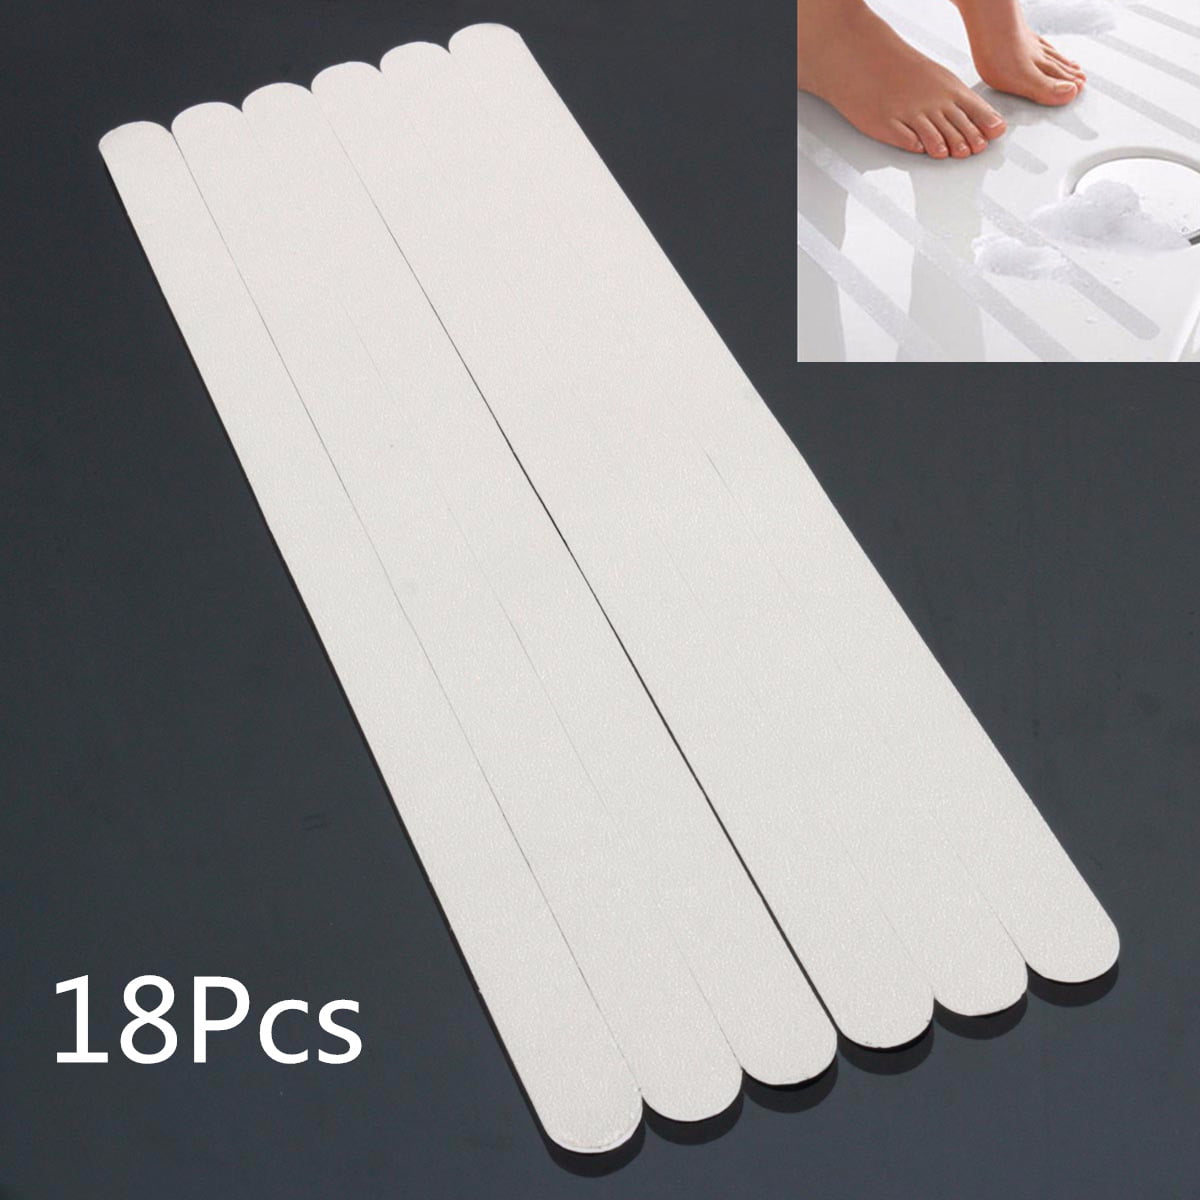 Details about   6pc Anti Non Slip Bath Mat Grip Stickers  Shower Strips Flooring Safety Tape Pad 